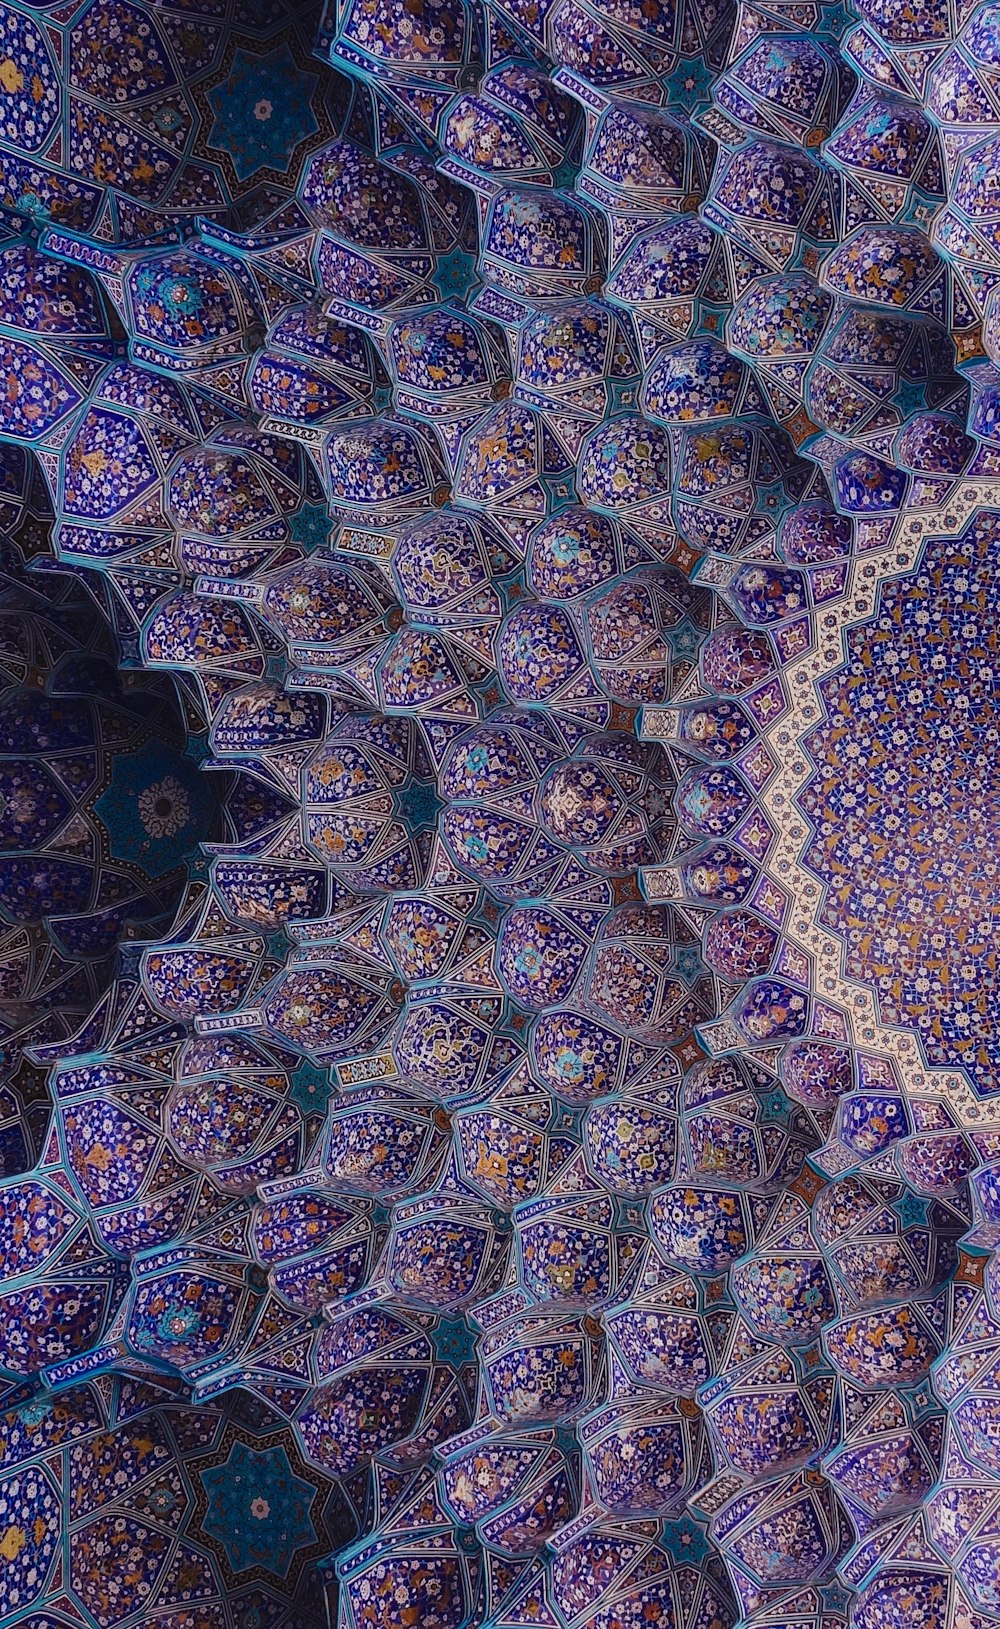 an intricate blue and purple pattern on the ceiling of a building